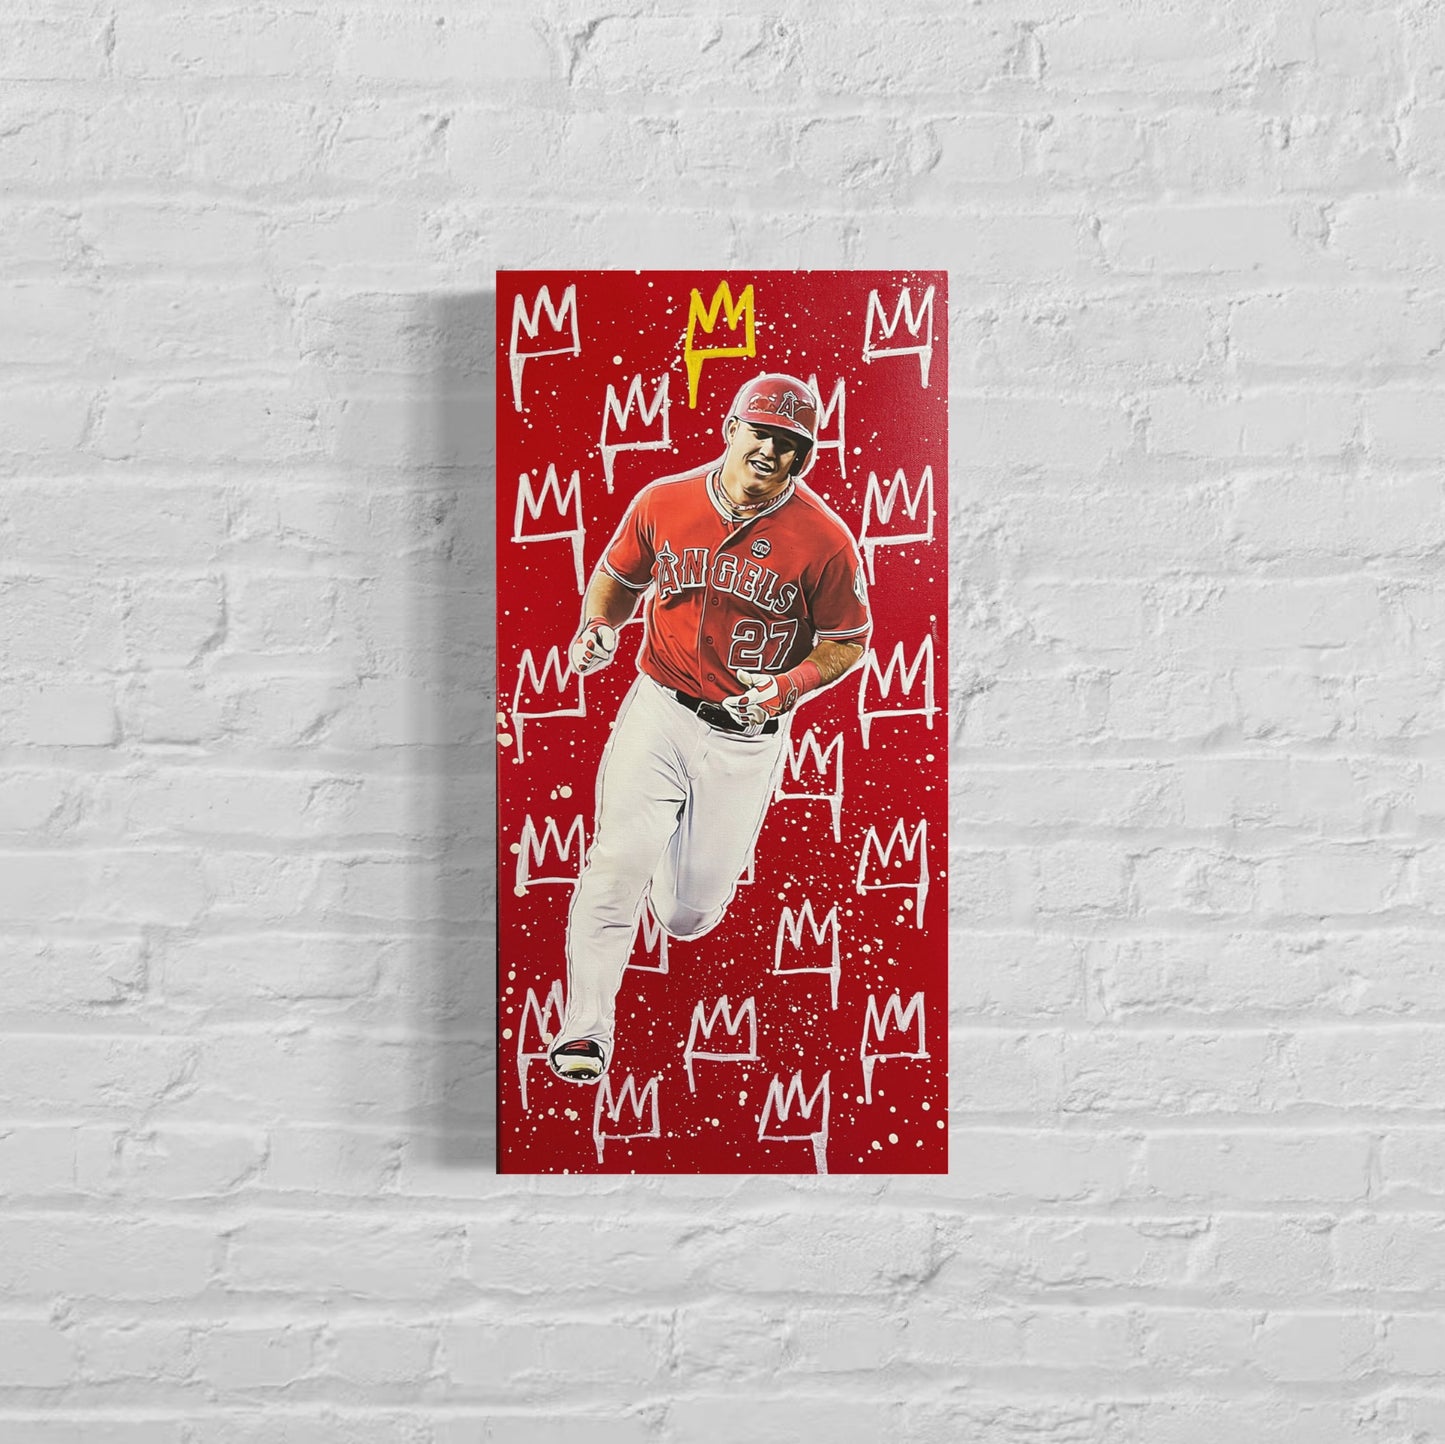 Mike Trout: King Series, 2022. Original 1/1 Mixed Media on 12x24x1.5in Canvas